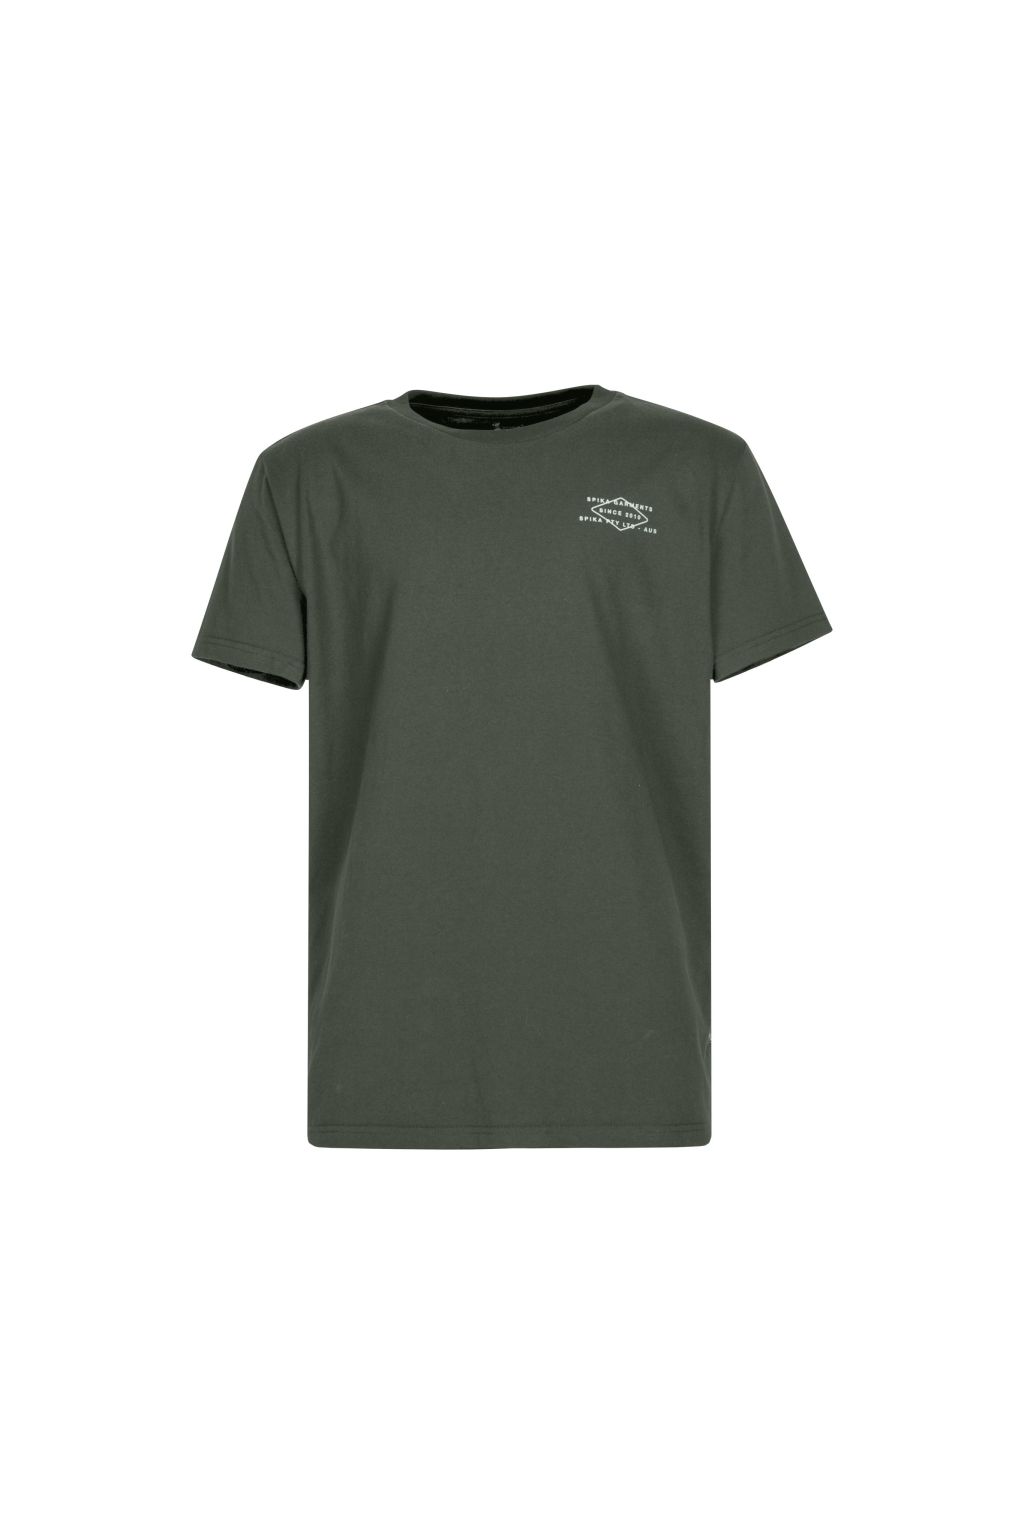 Spika Go Scope Mens T-Shirt - Washed Green - S - Mansfield Hunting & Fishing - Products to prepare for Corona Virus